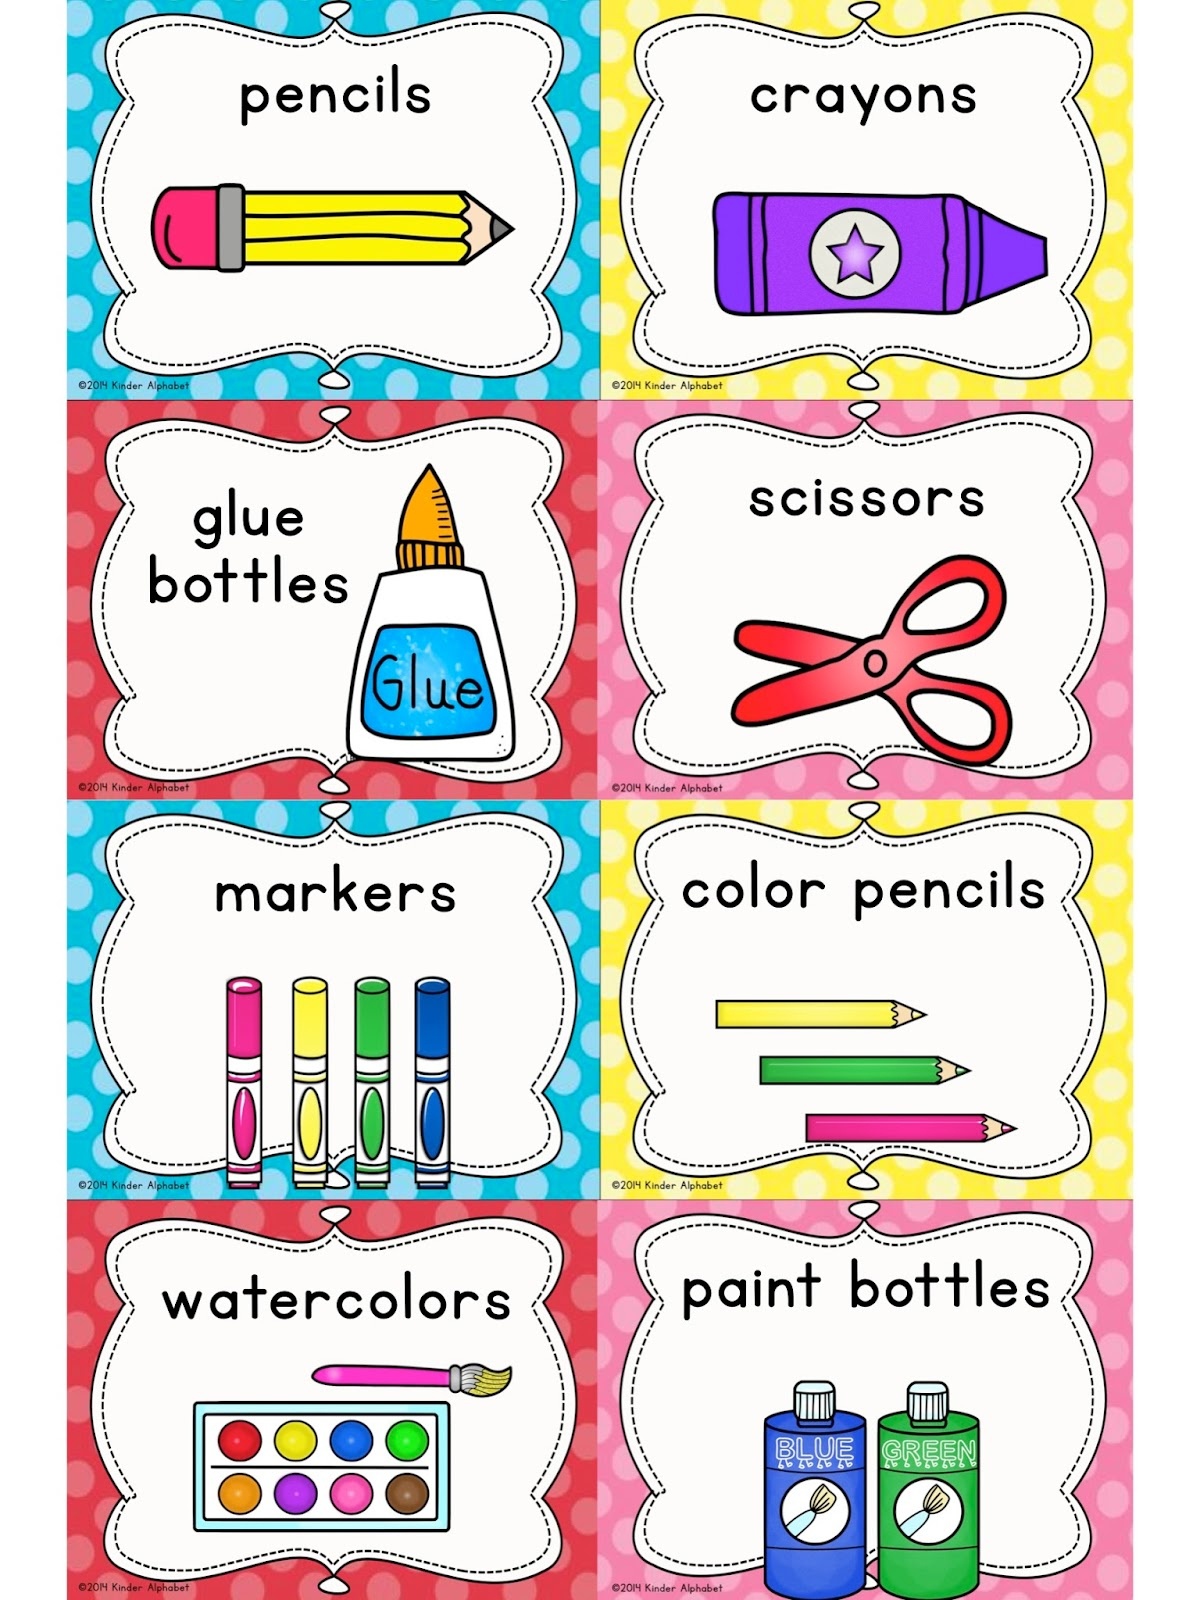 Free Printable Classroom Signs And Labels (85+ Images In Collection - Free Printable Classroom Signs And Labels